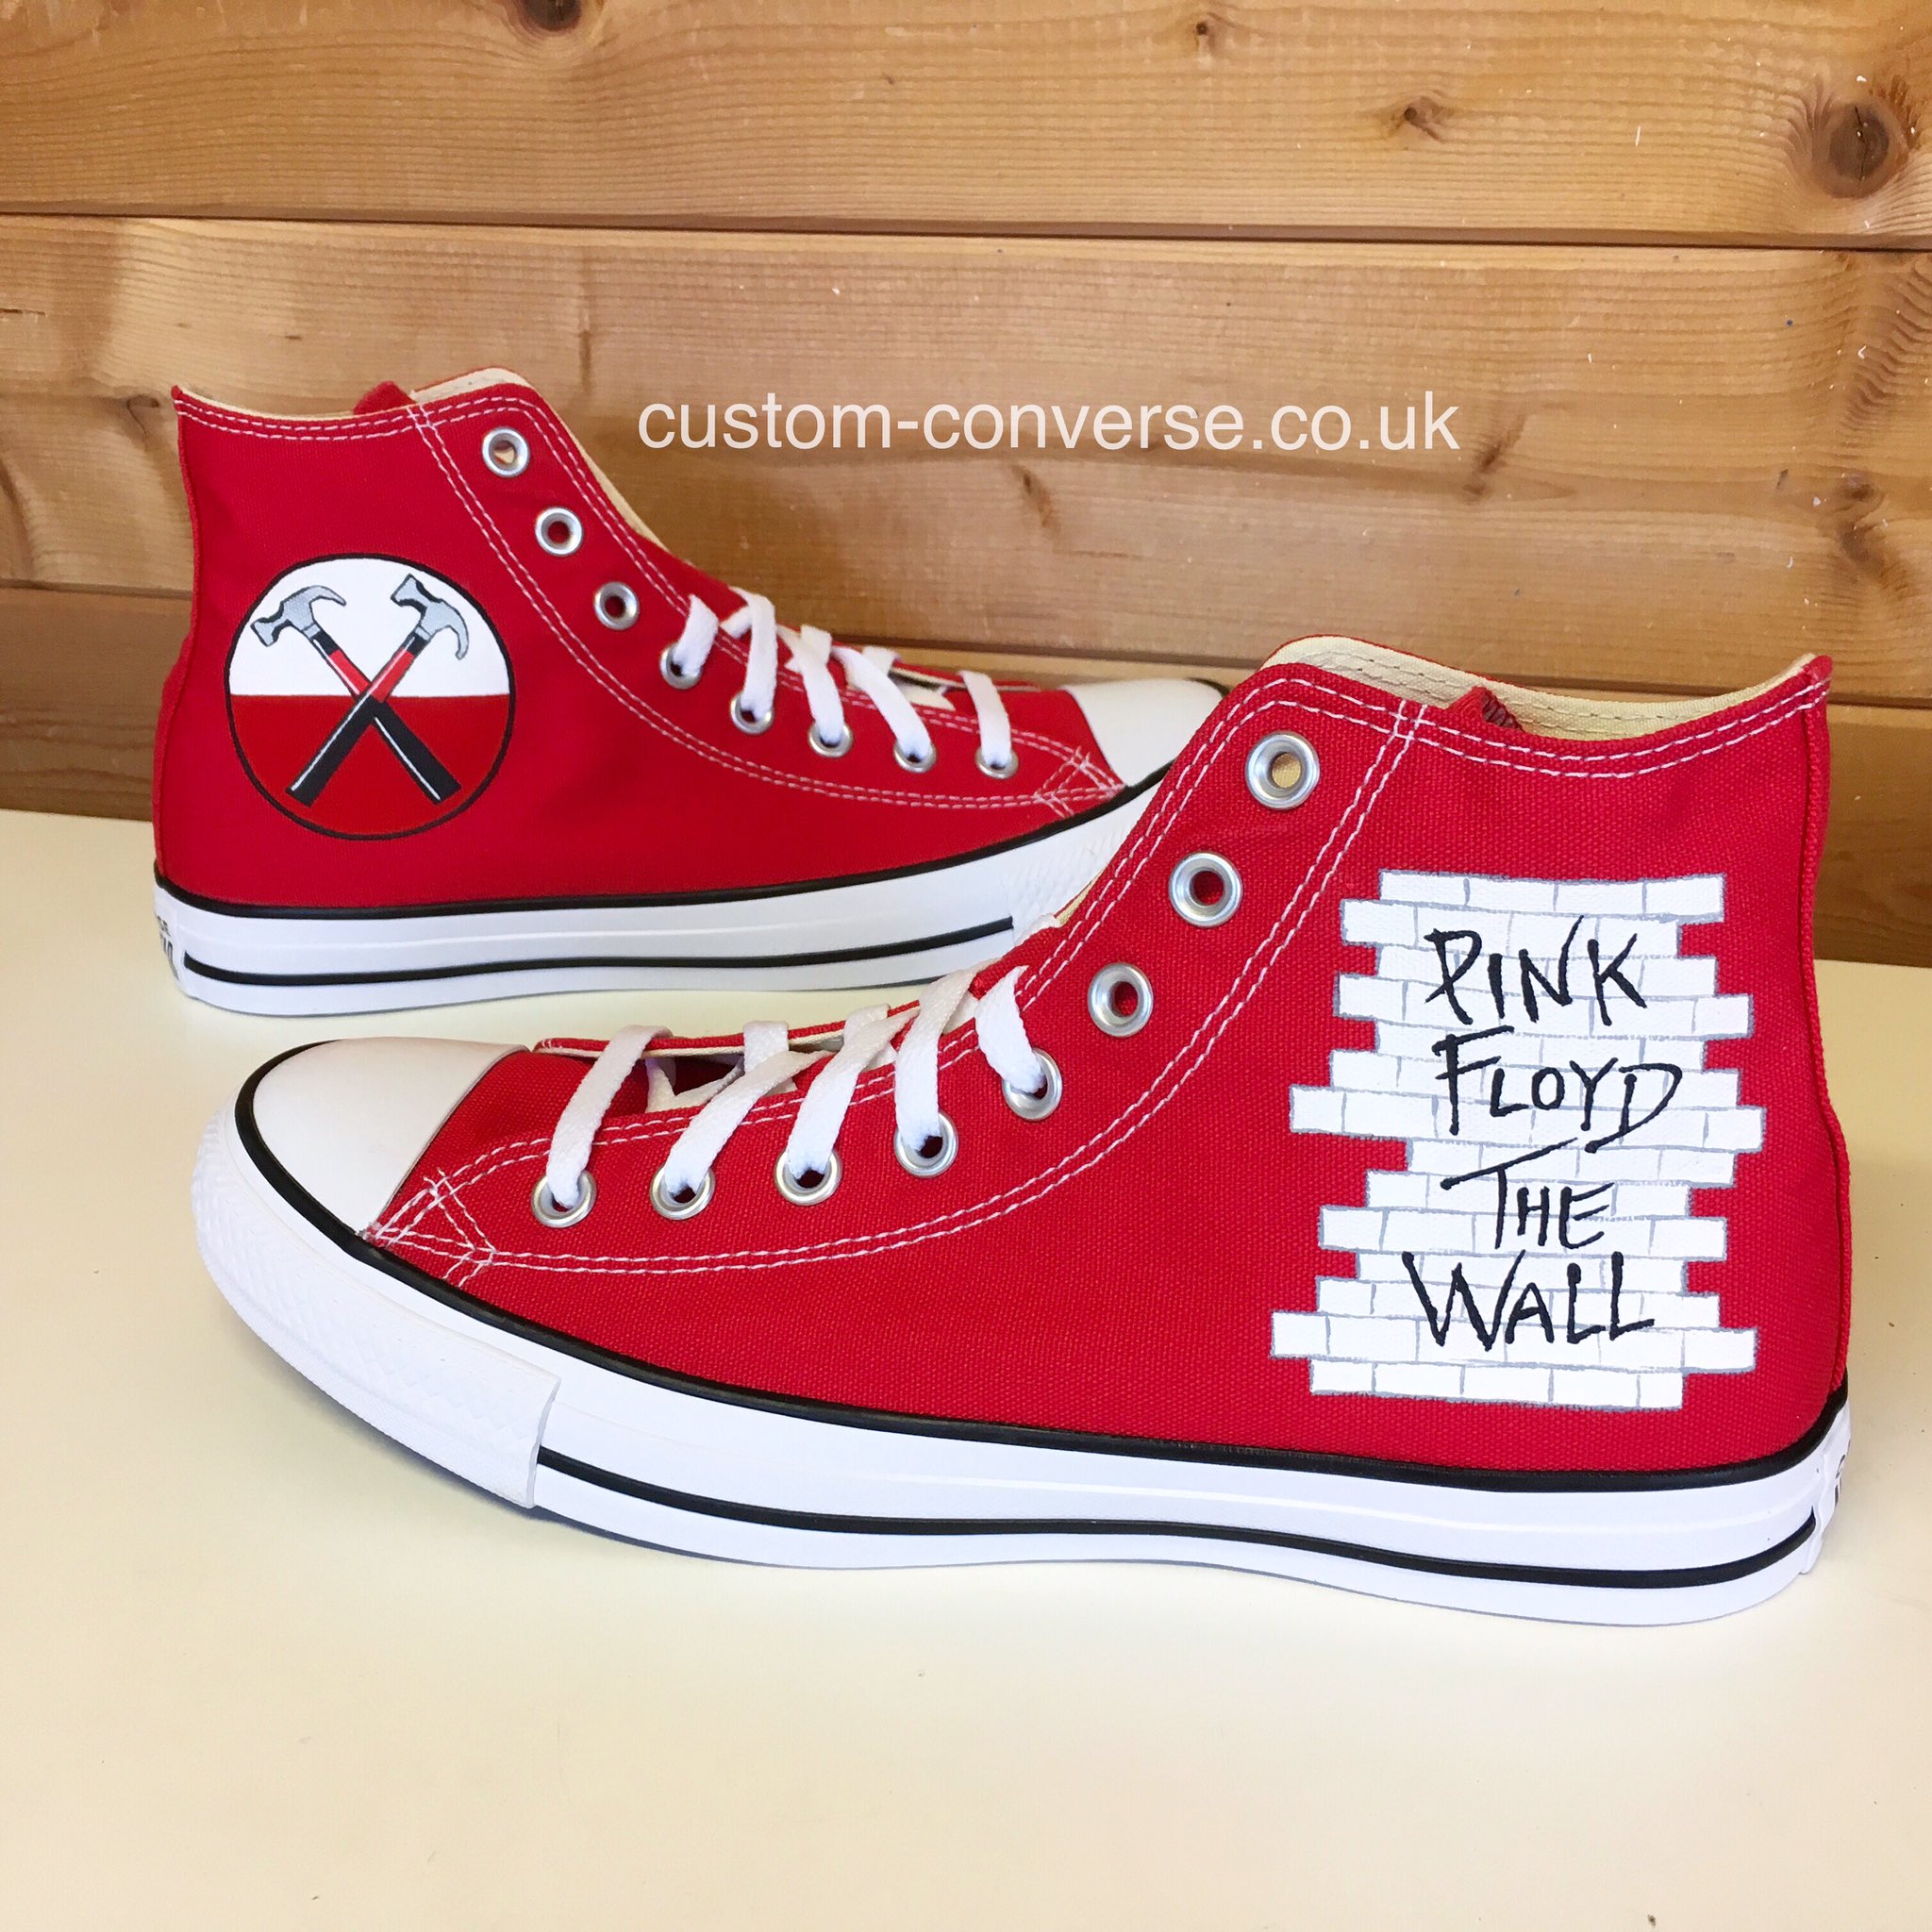 Custom Converse on Twitter: "Pink Floyd The Wall and Hammers on Red high  top Converse https://t.co/CRChWueHM2" / Twitter